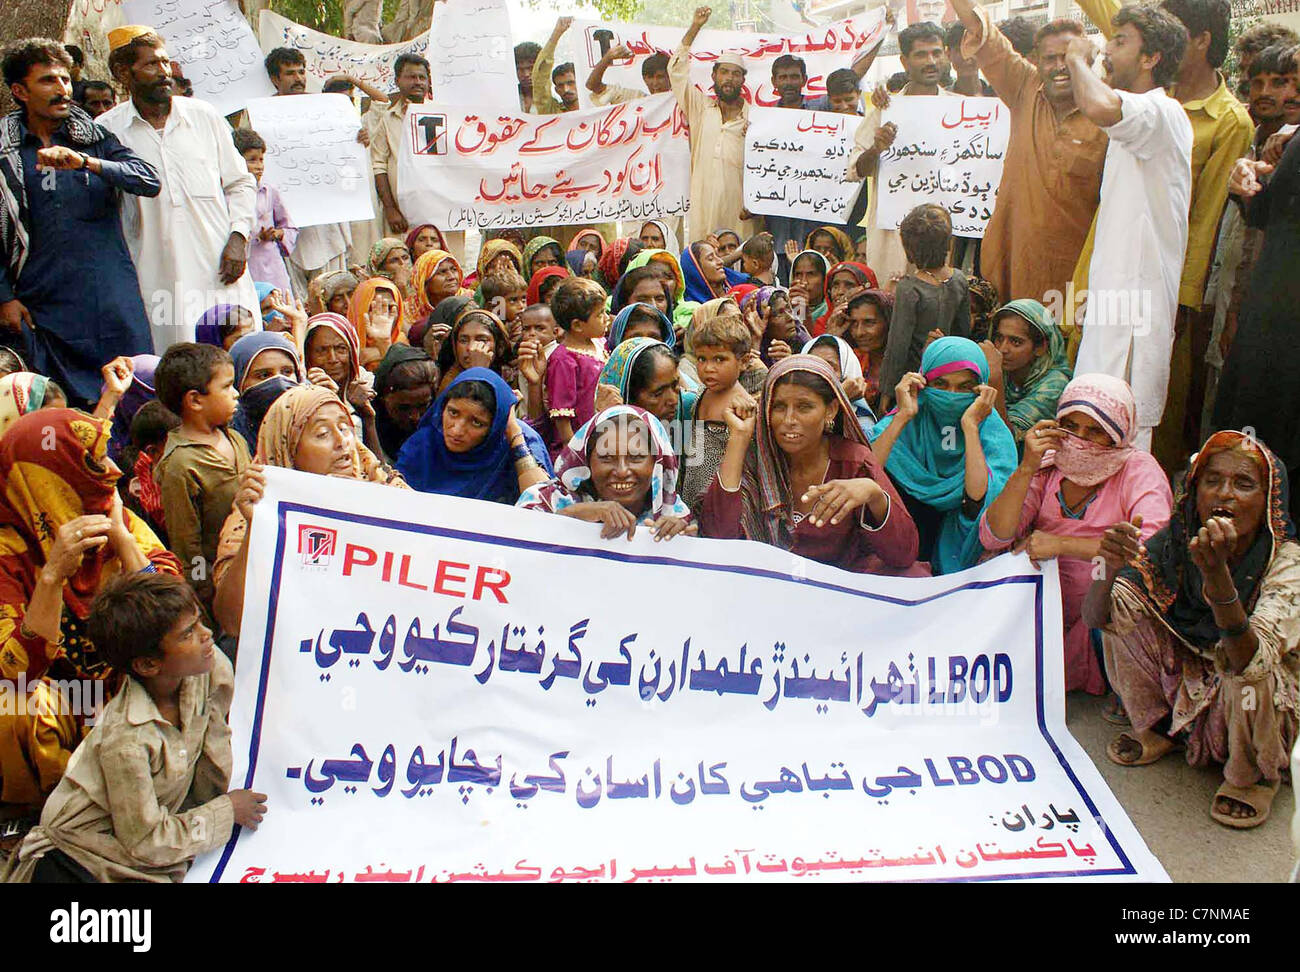 Flood affected people from Sanghar District are protesting in favor of their demands during a demonstration Stock Photo